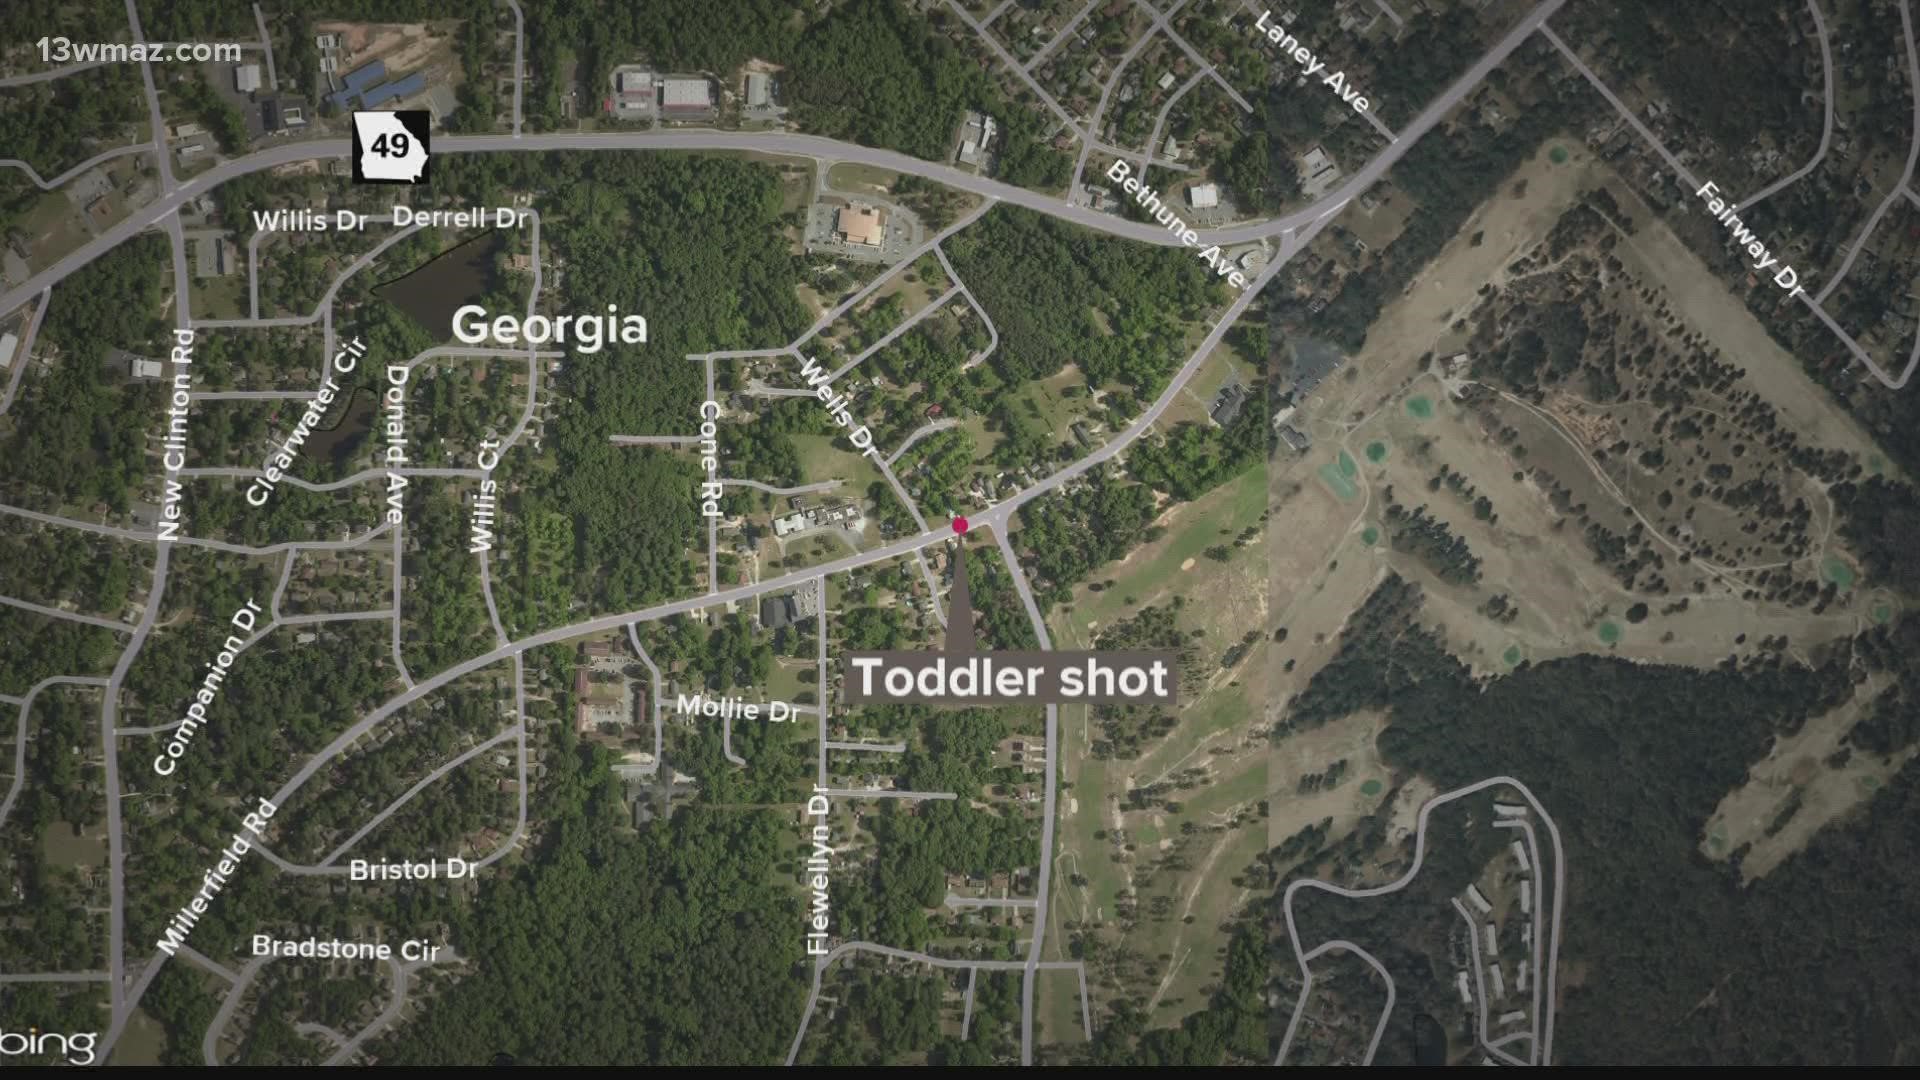 According to the Bibb County Sheriff's Office, a 3-year-old is in the hospital listed in critical condition.